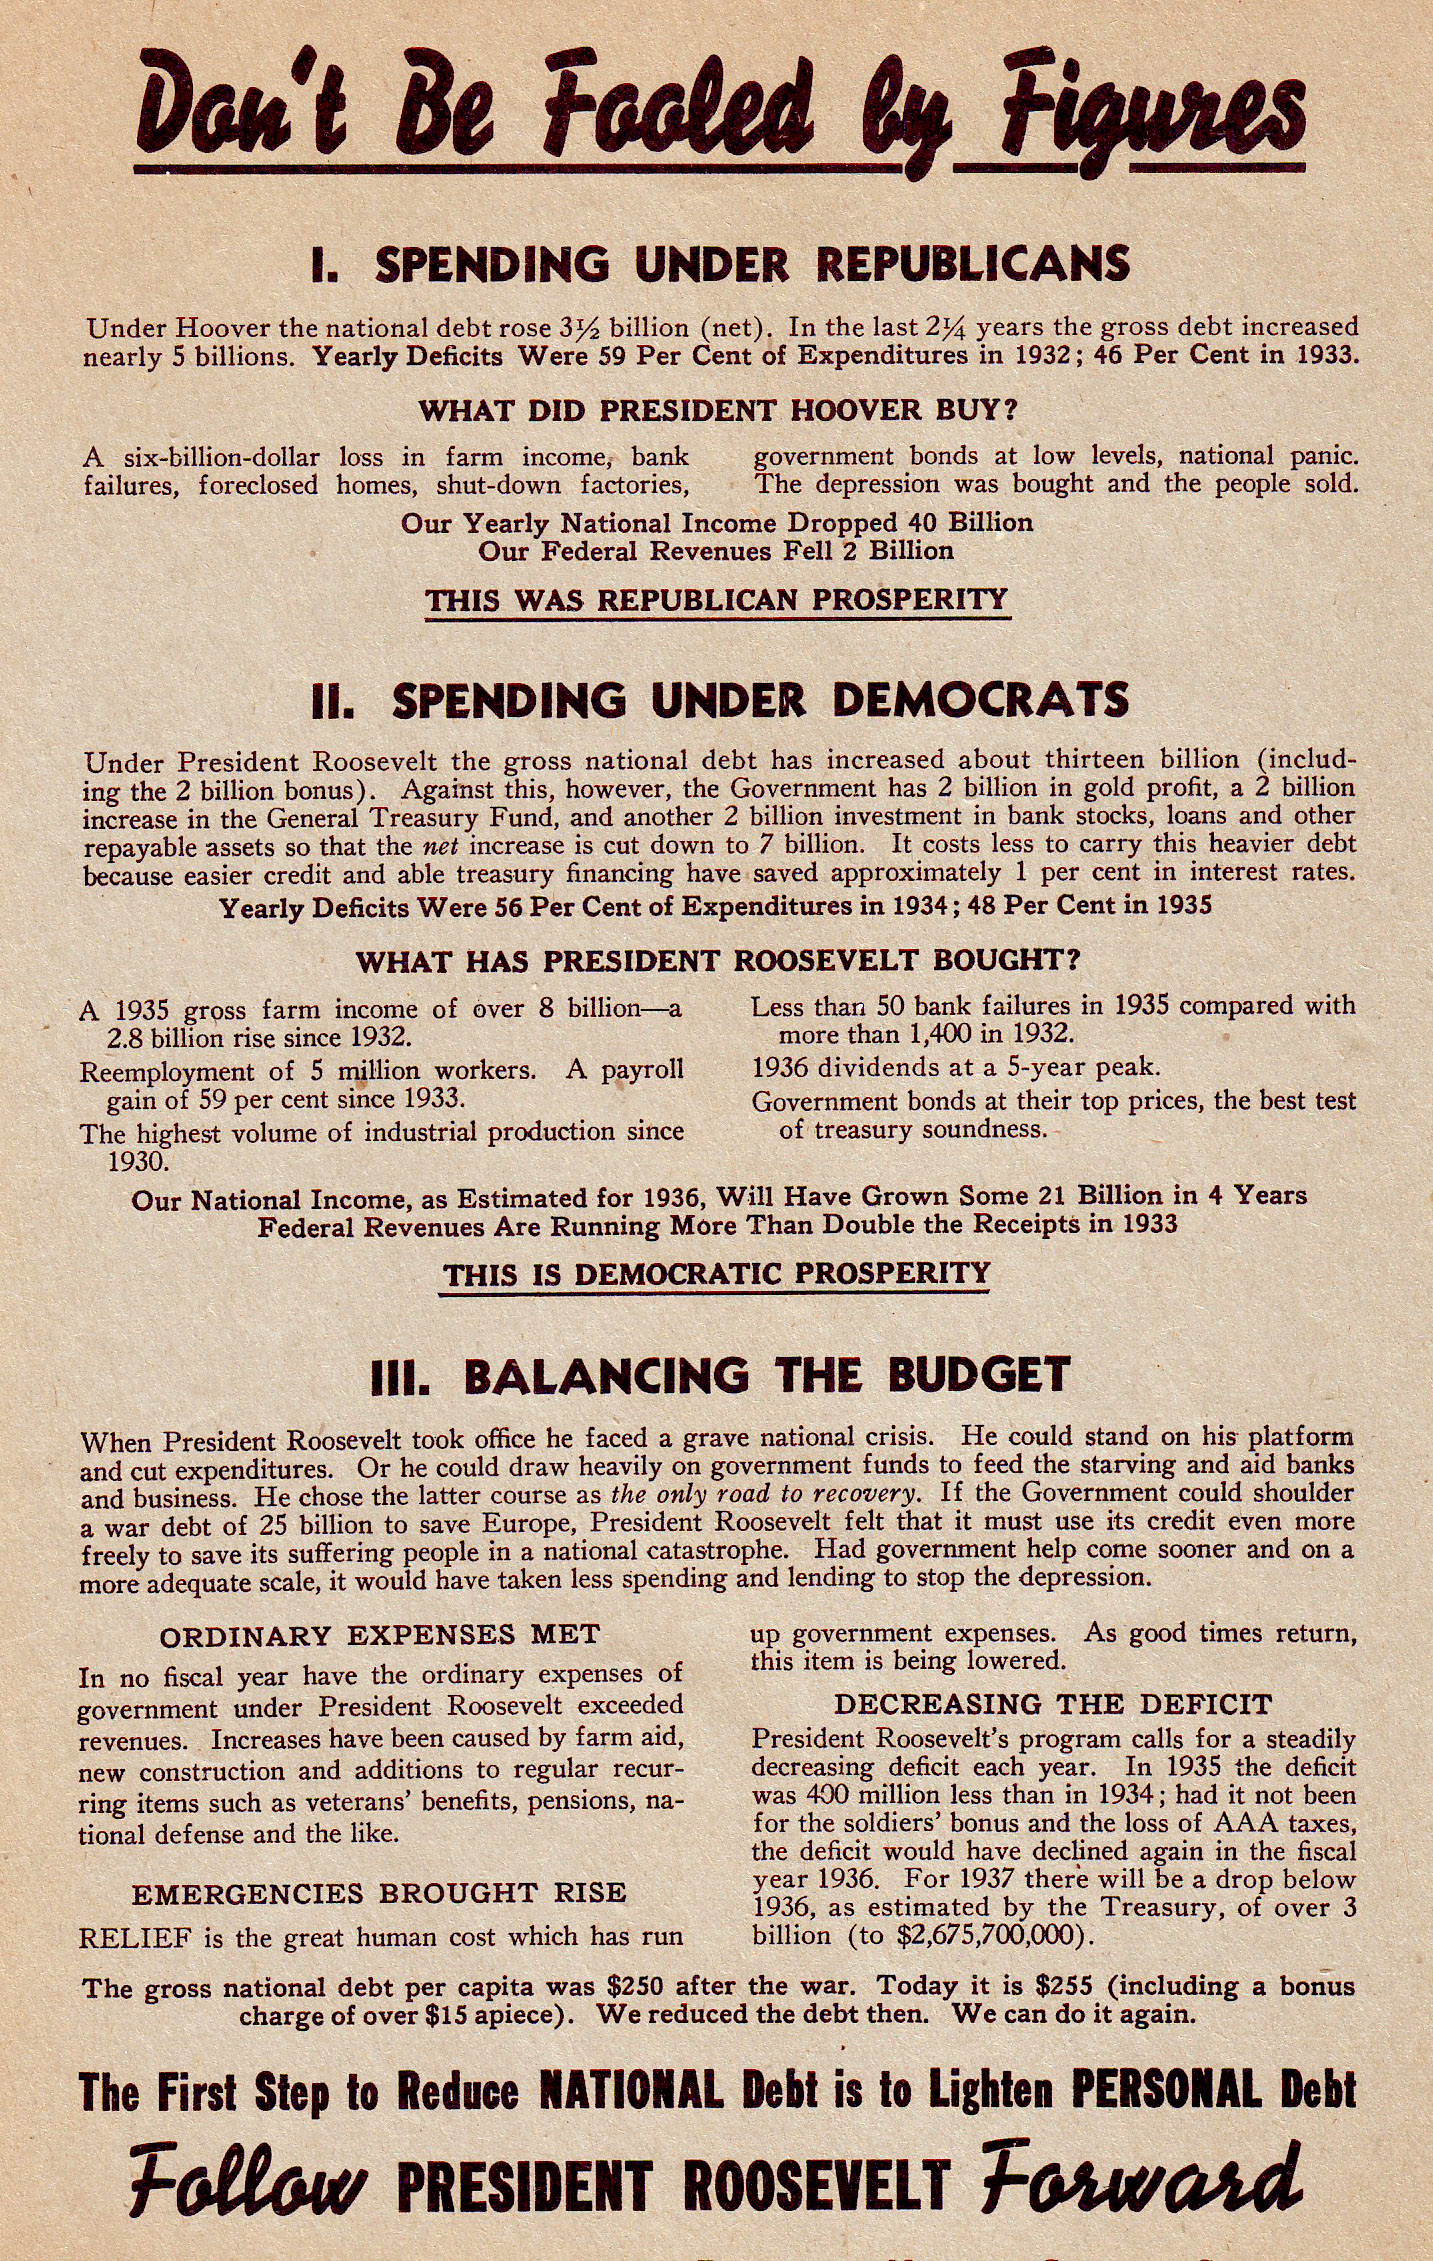 1936 campaign poster